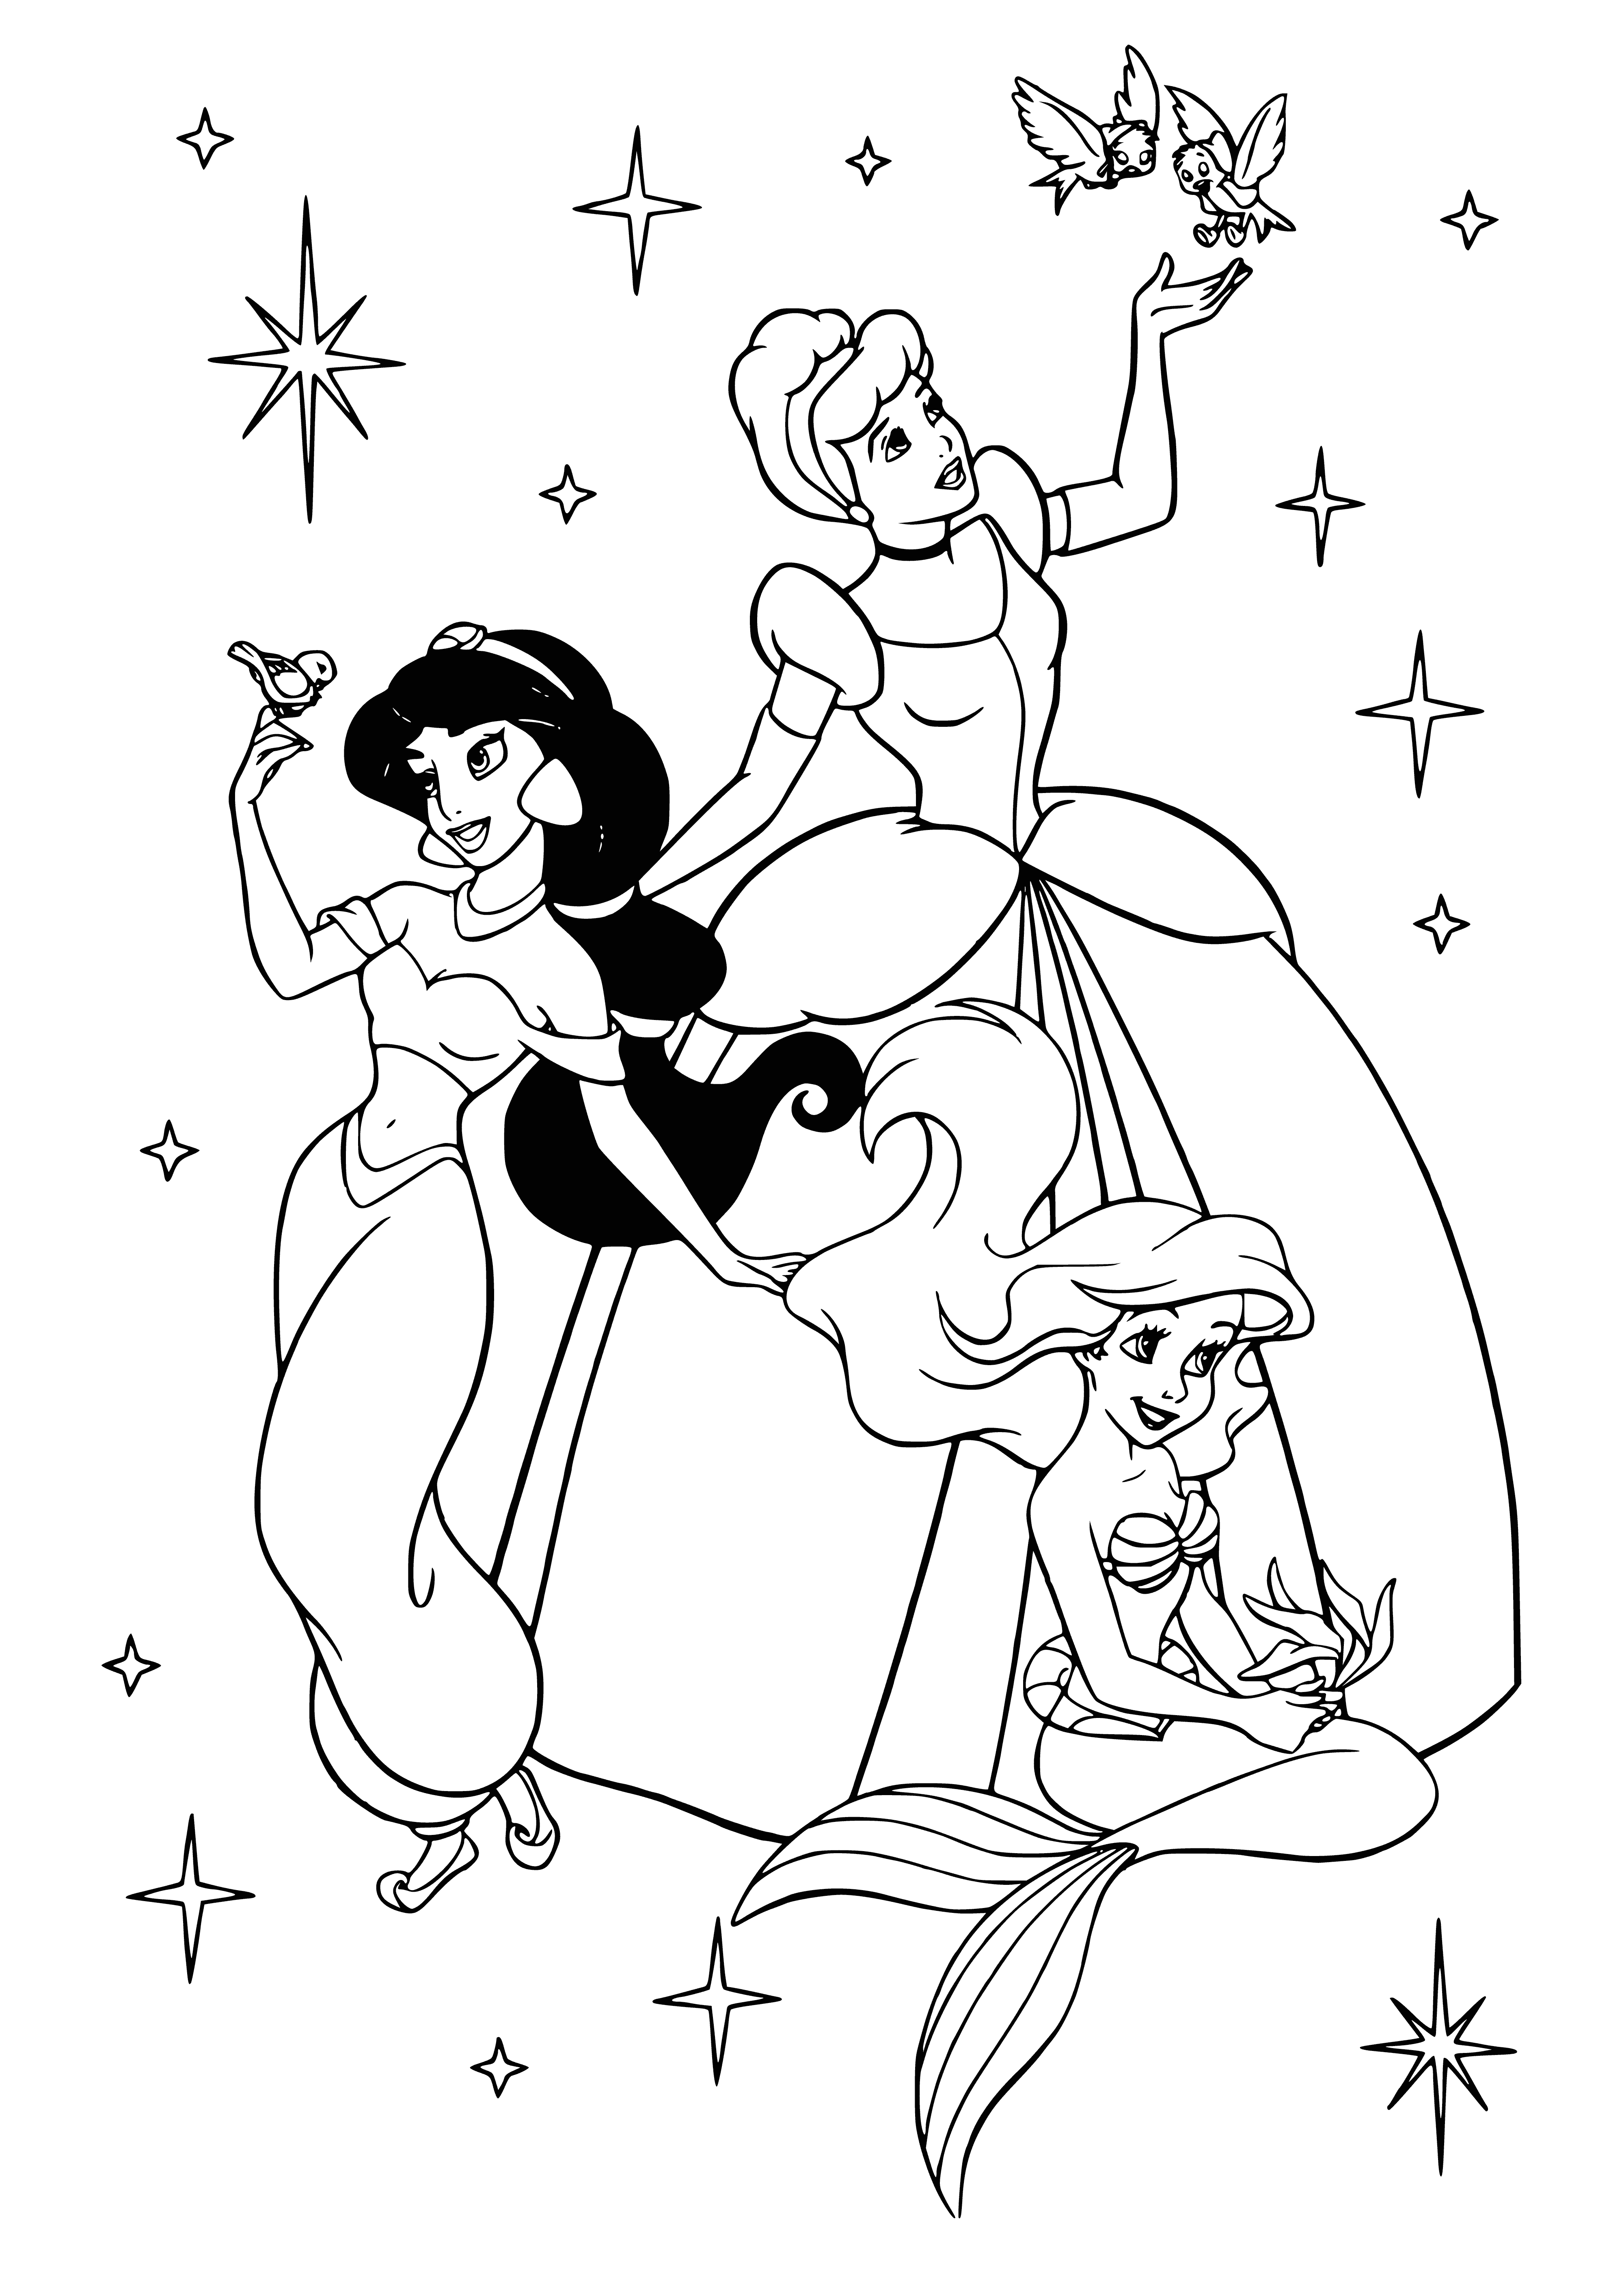 coloring page: Ariel, Jasmine, and Cinderella, three princesses with different looks and settings.